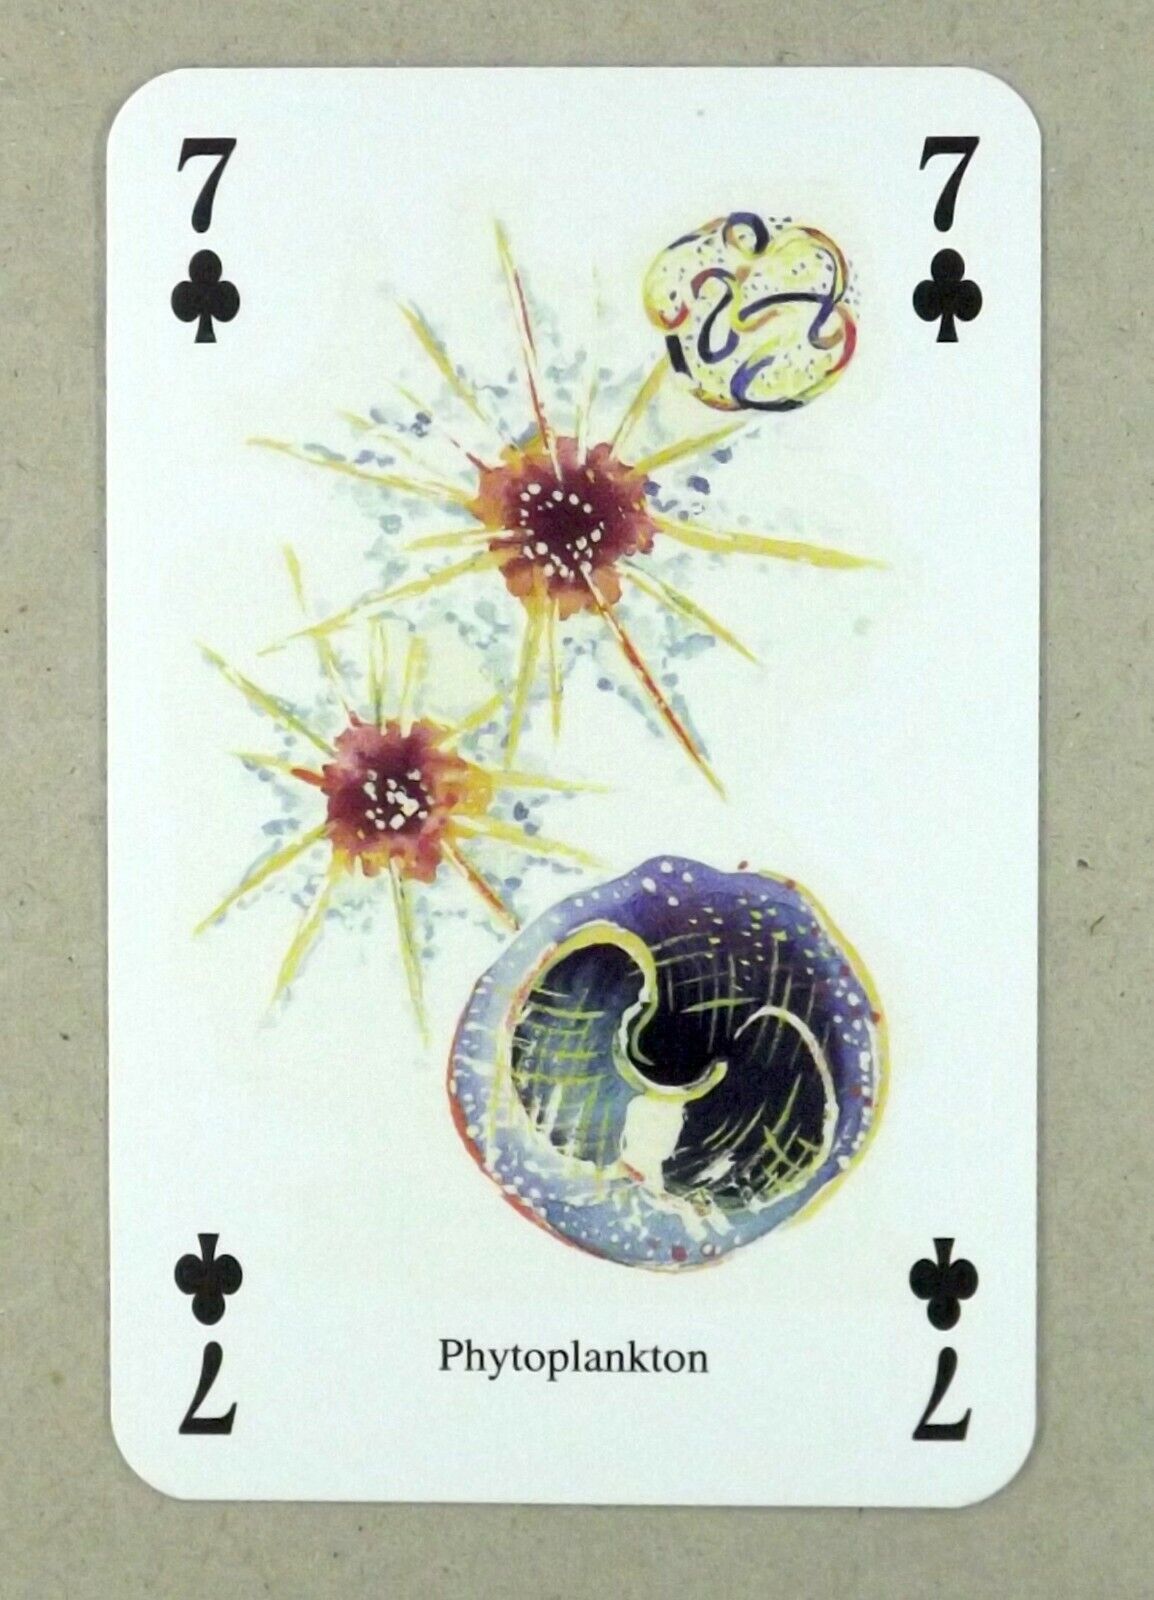 1 x playing card ≠ Phytoplankton ≠ 7 of Clubs ≠ Q7